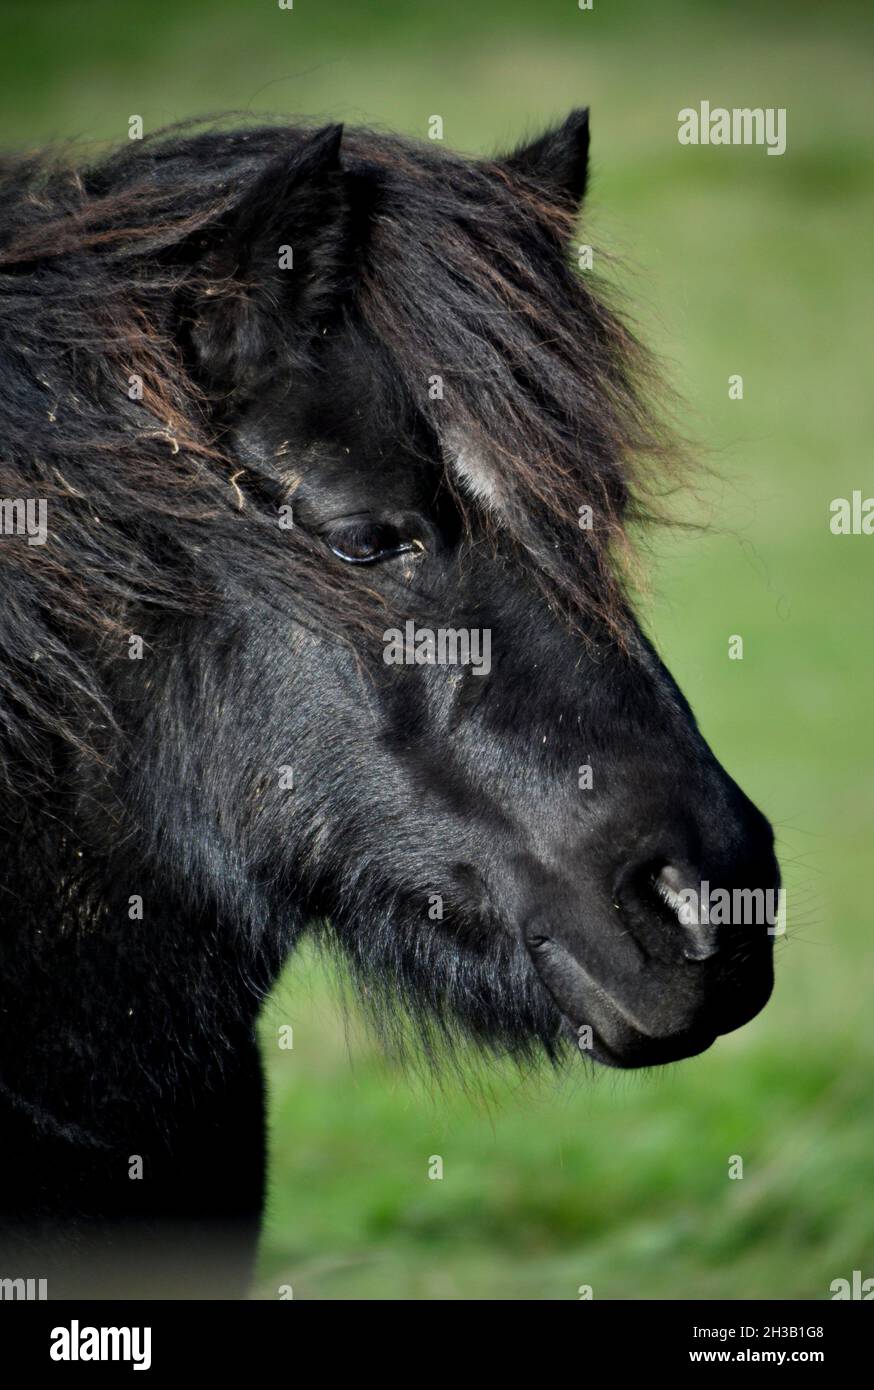 Close up of black Shetland pony in a field Stock Photo